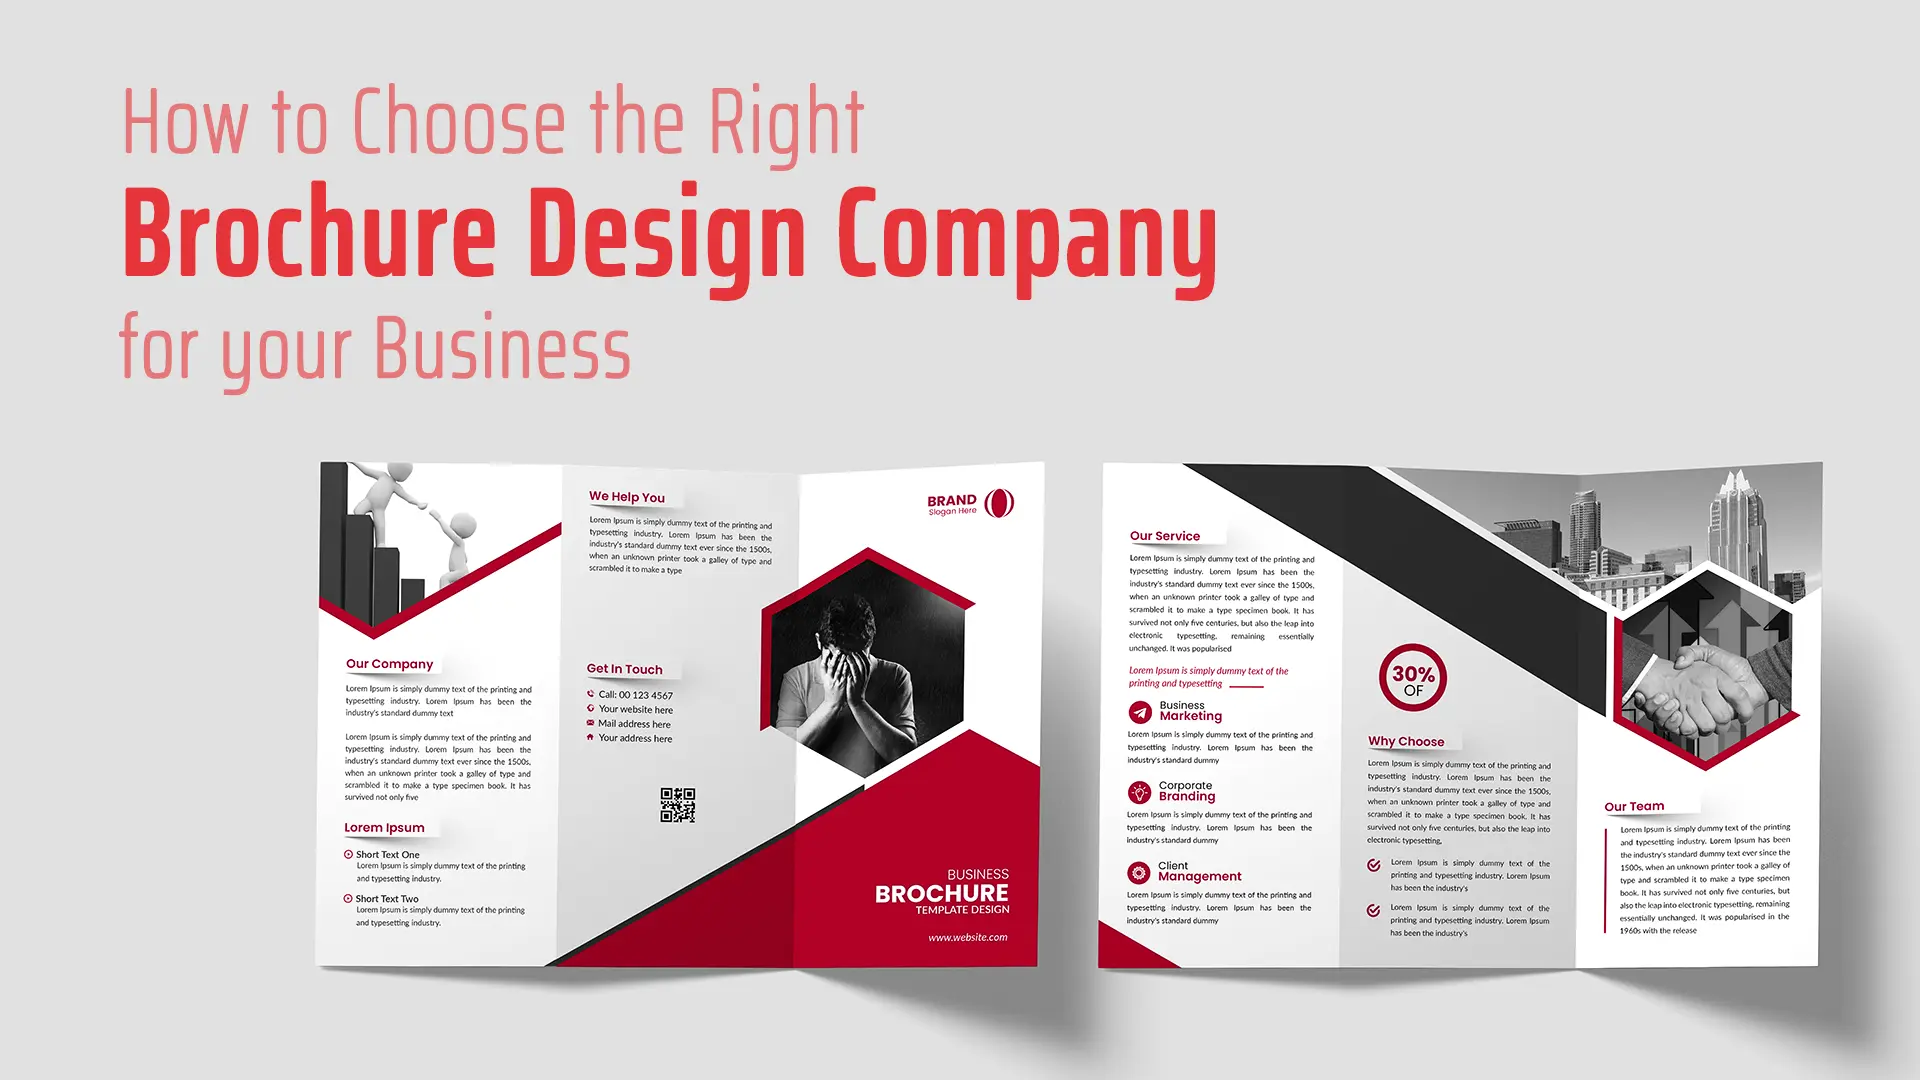 How to Choose the Right Brochure Design Company for your Business